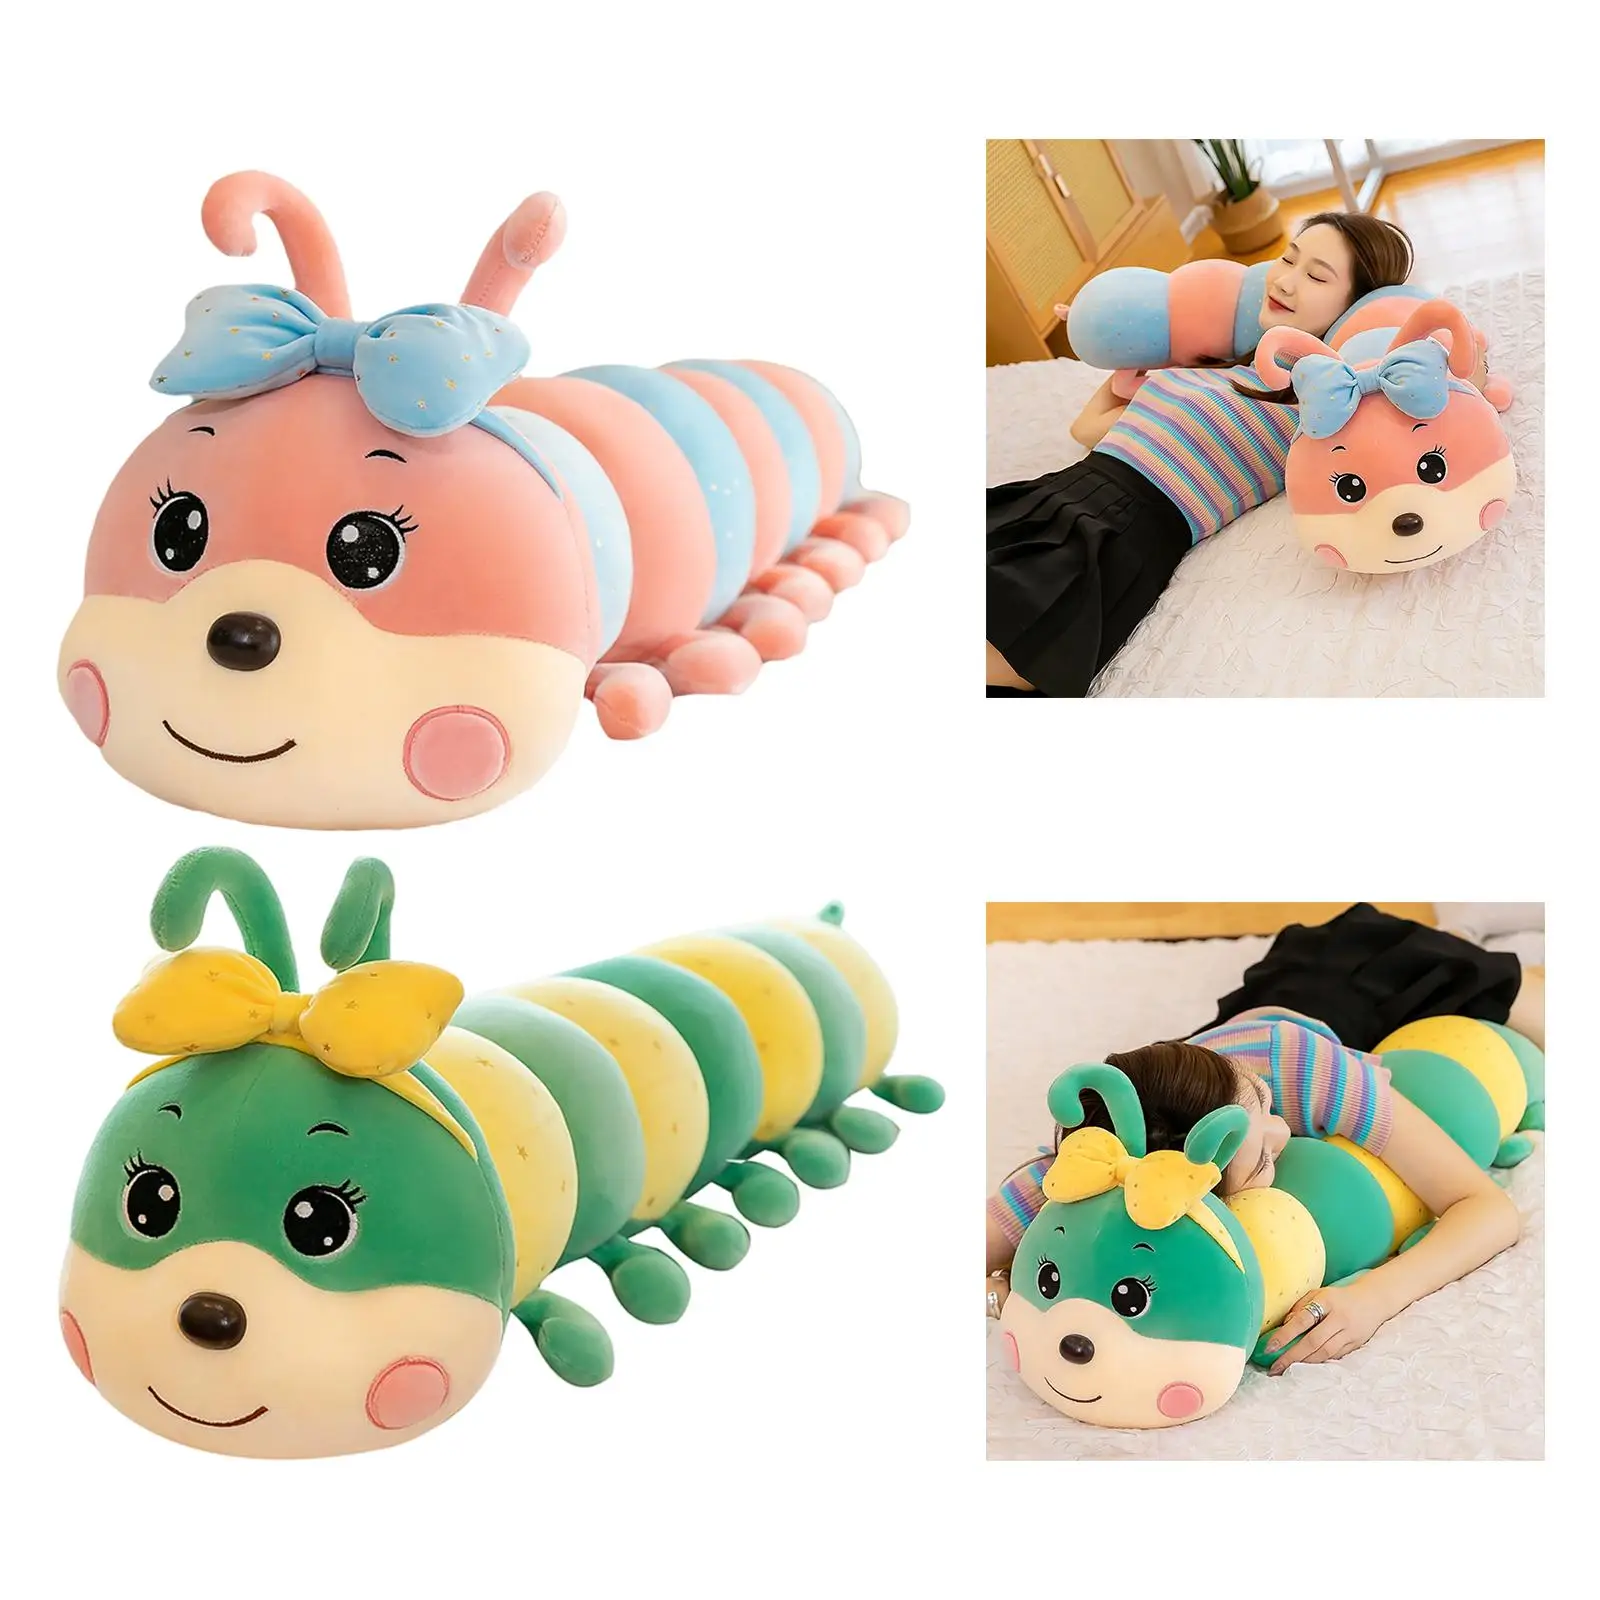 Adorable Caterpillar Wiggler Insect Worm Sleeping Pillow Cushion Stuffed Plush Doll for Kid Children Bedtime Baby Gifts